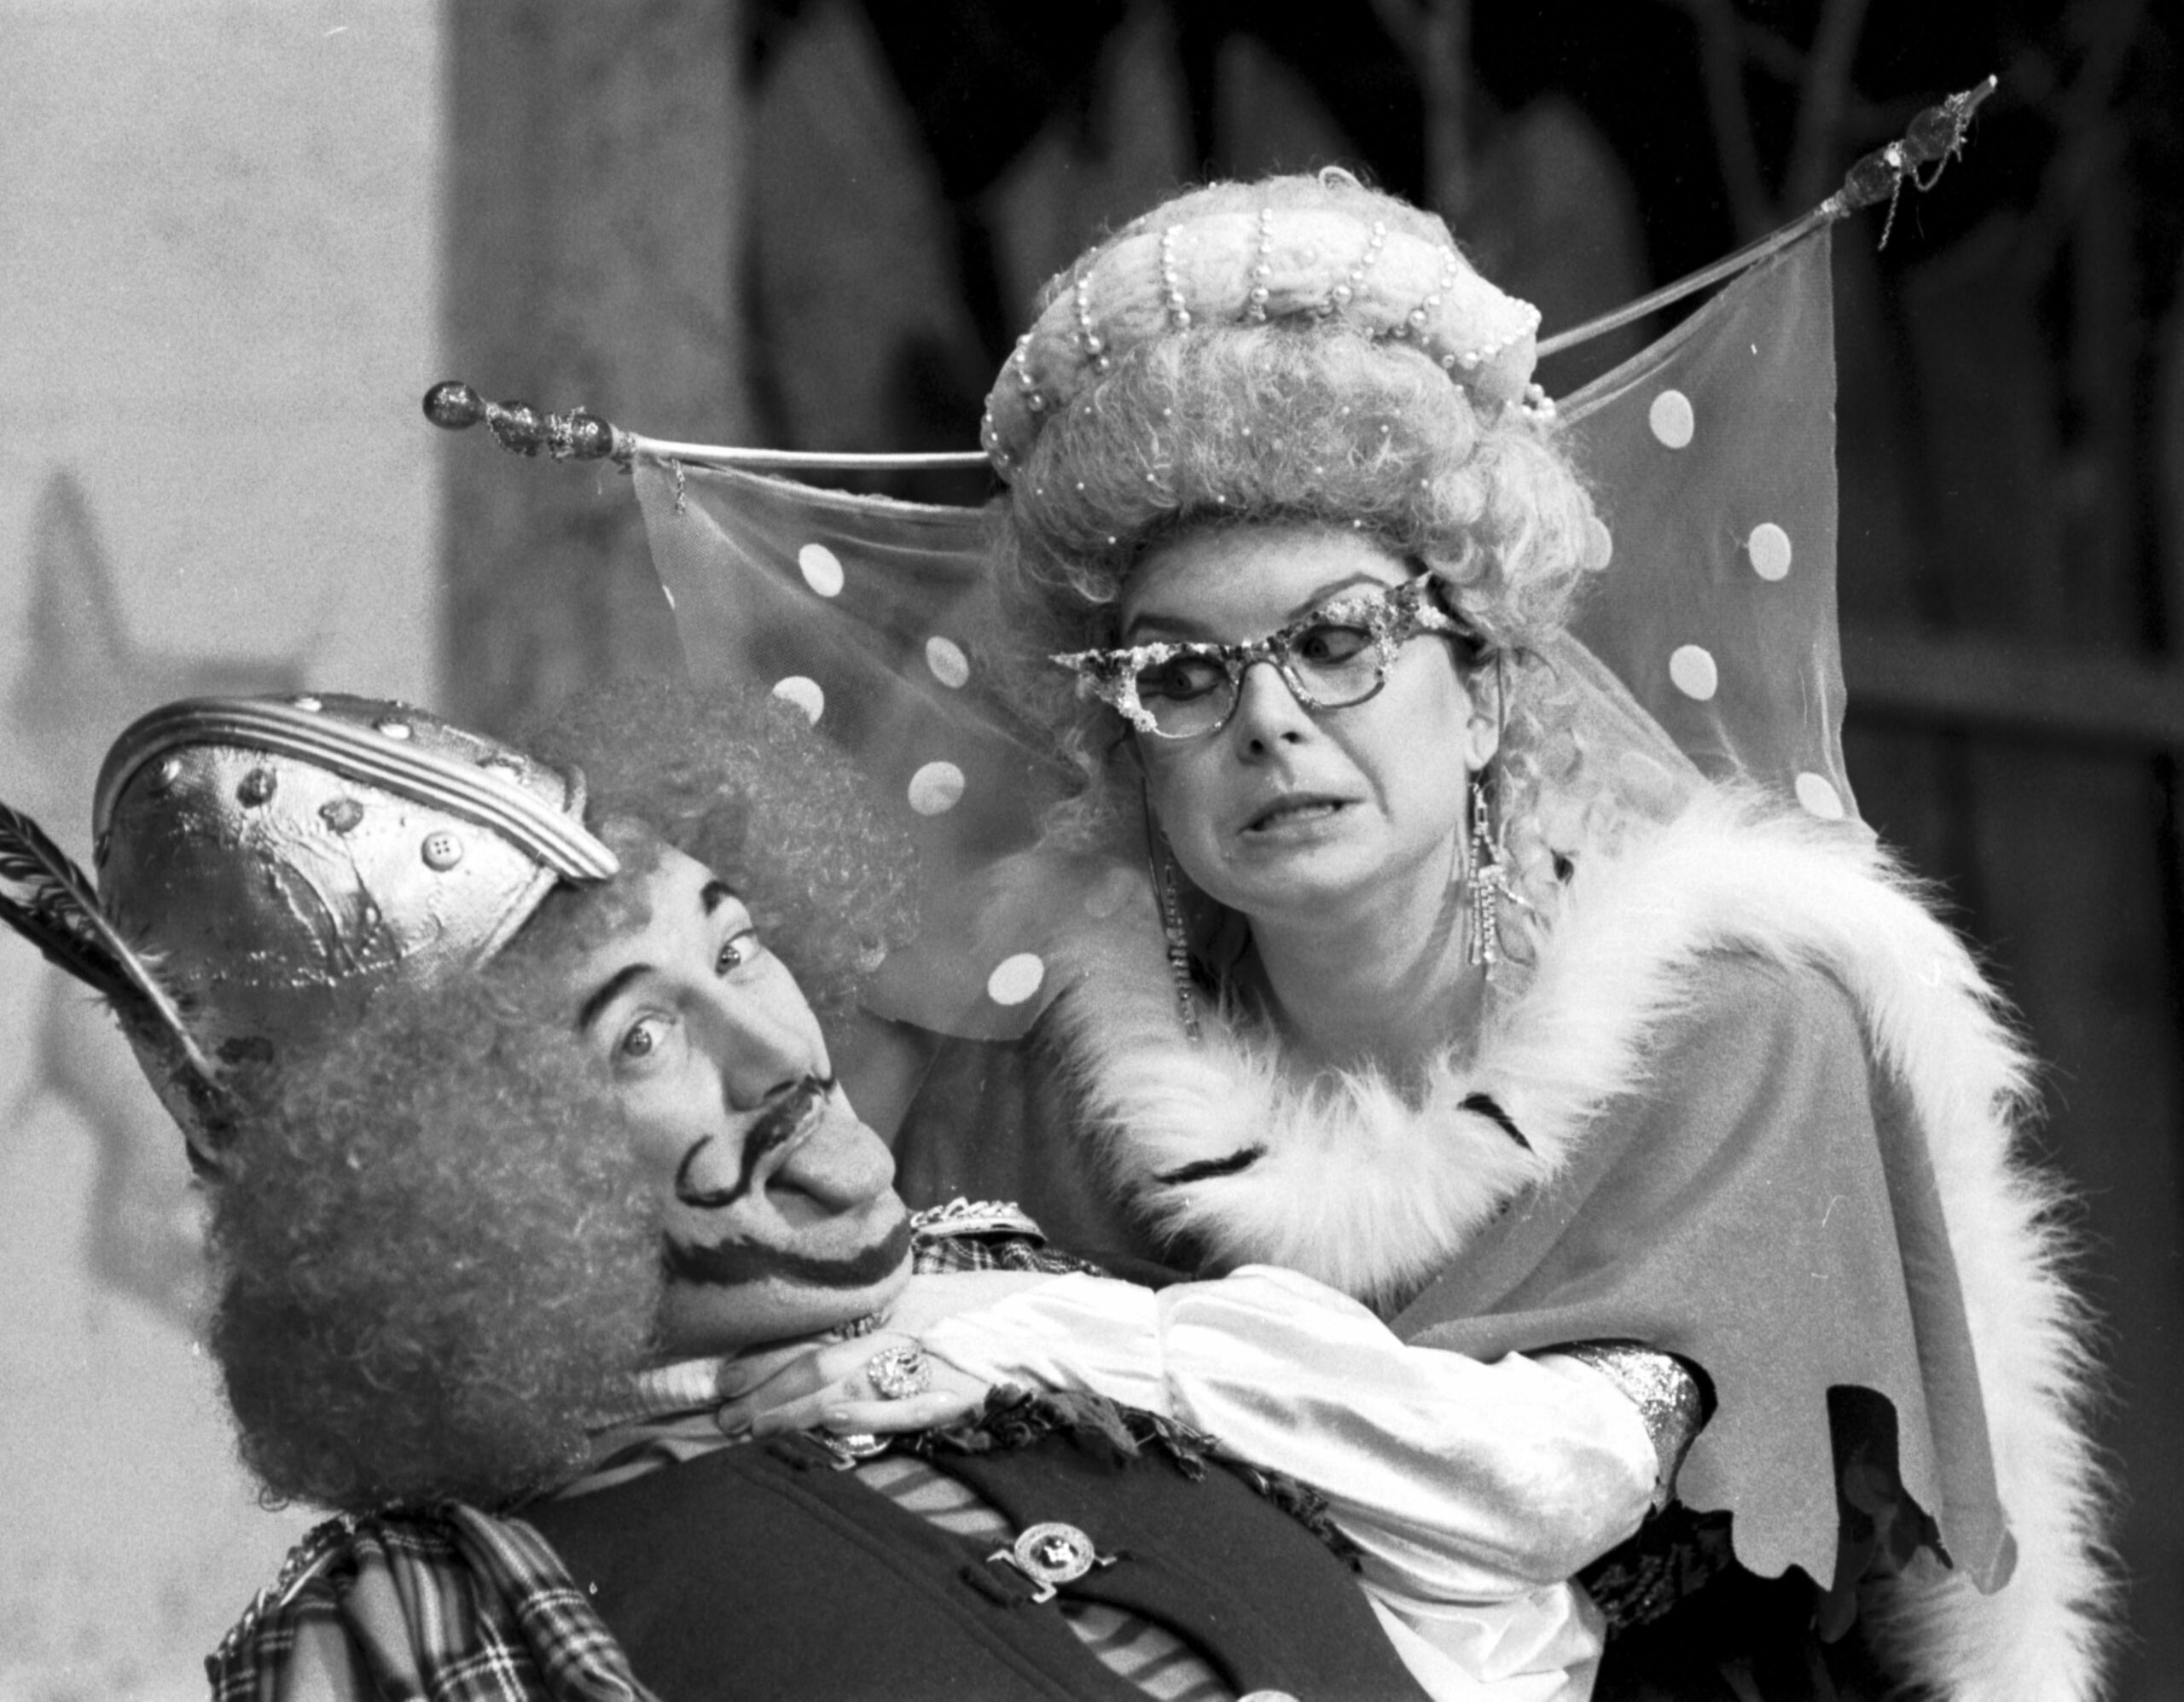 A black and white photo of Elain Smith and a co-star mid-scene during a pantomime. One appears to have some sort of medieval costume featuring a metal helmet, a large wig and a comedy moustache. Elaine C Smith is wearing a fur-lined dress, large glasses and extravagant headwear.